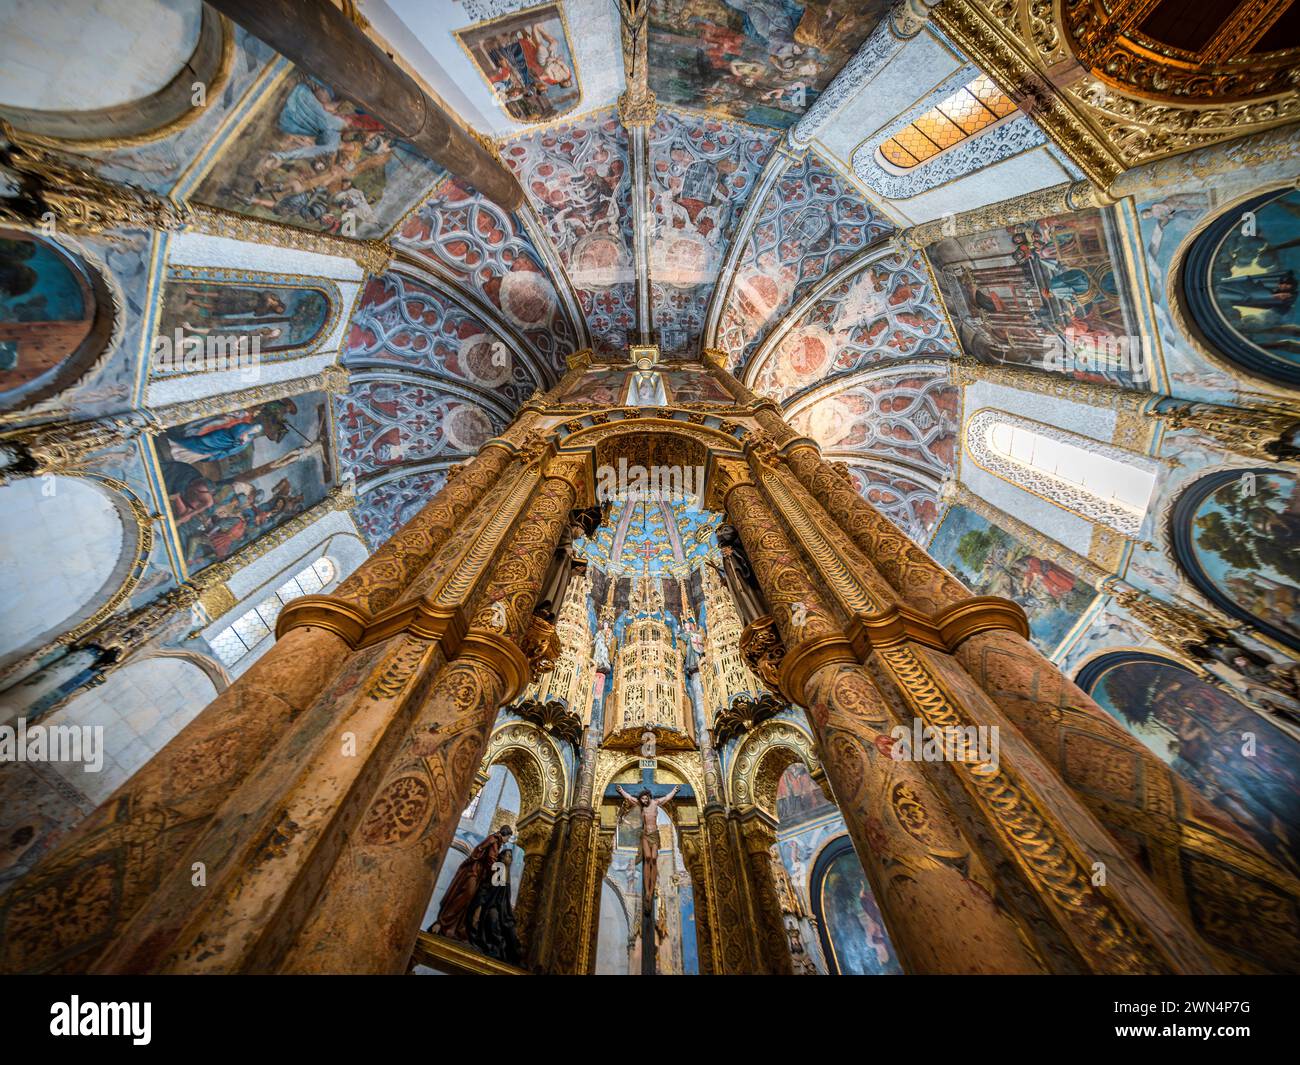 Interior of 12th-century round church at the Convent of Christ in Tomar, Portugal. Stock Photo